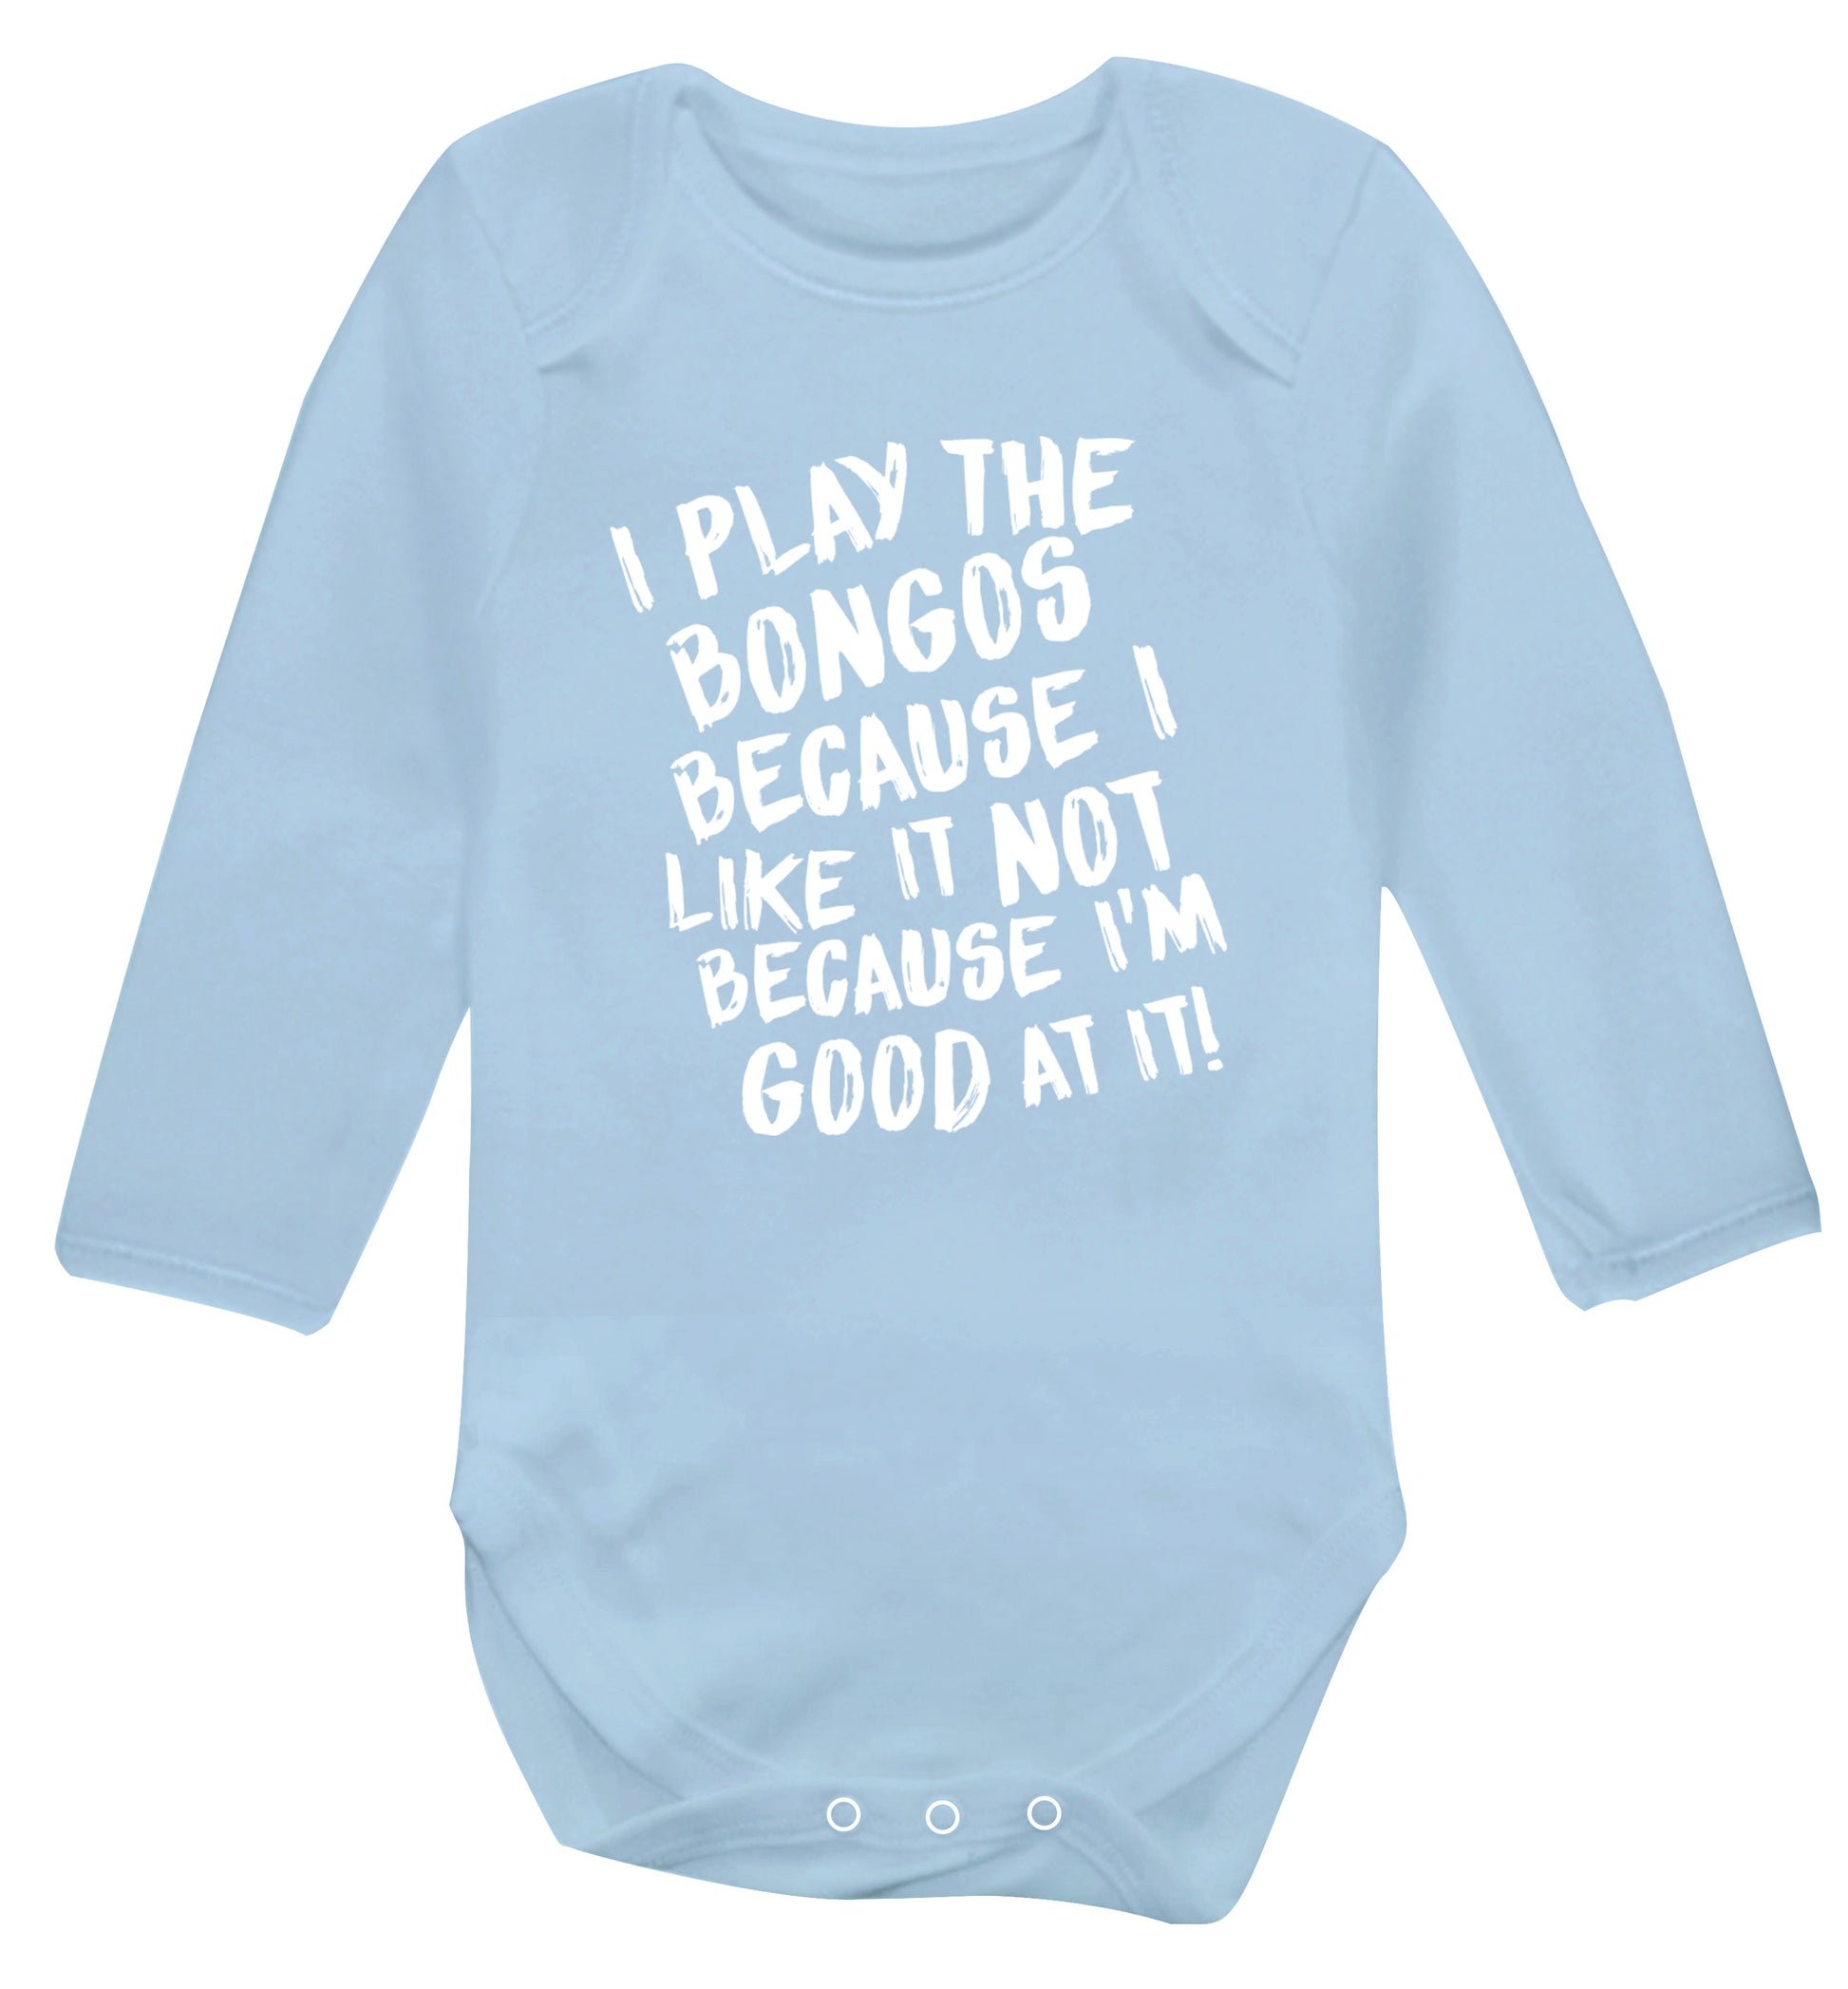 I play the bongos because I like it not because I'm good at it Baby Vest long sleeved pale blue 6-12 months